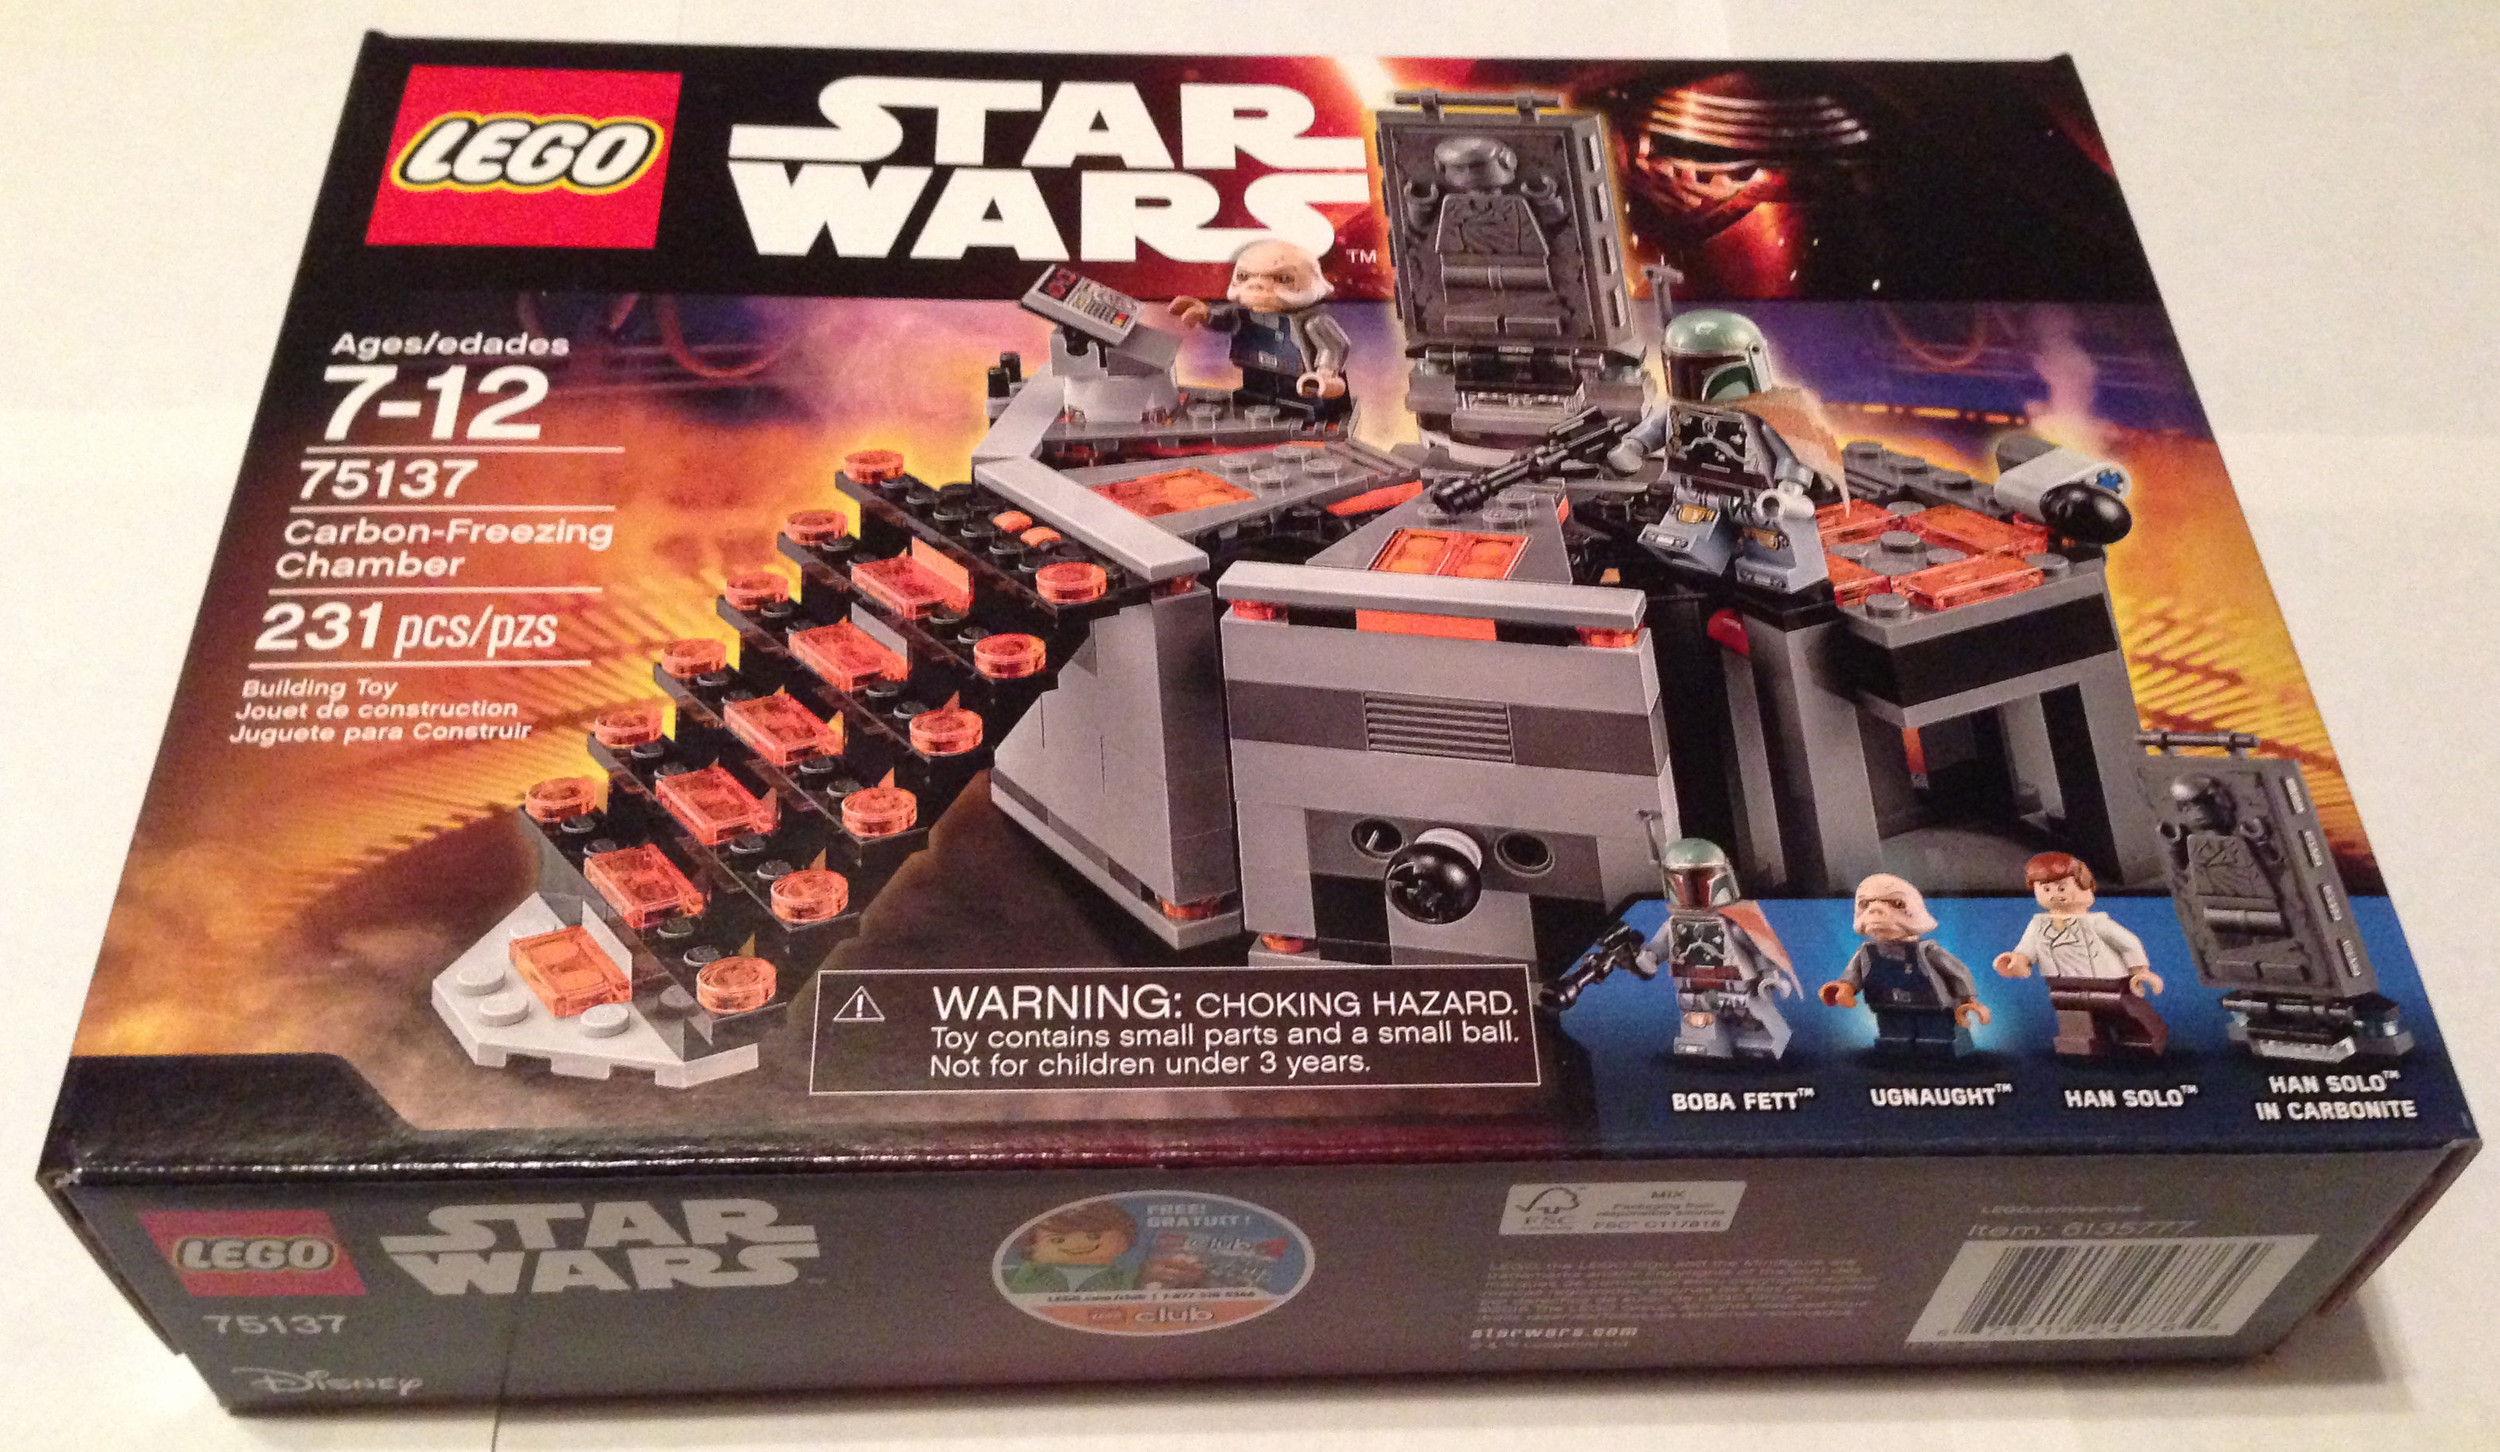 Set Review - Wars Carbon Freezing Chamber - #75137 — Bricks for